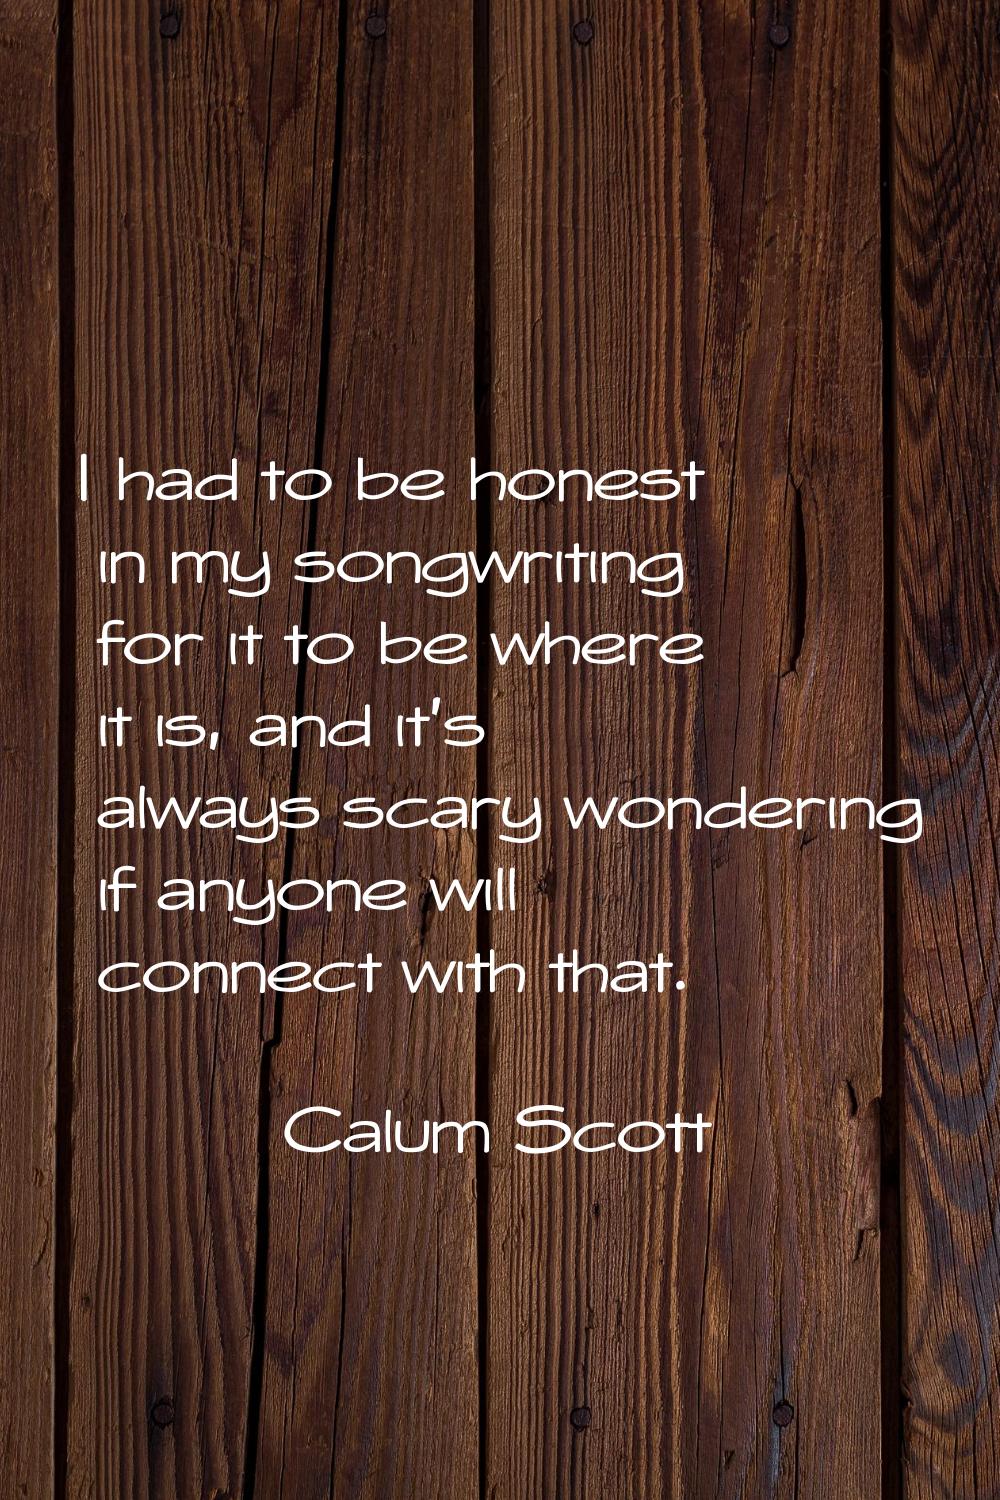 I had to be honest in my songwriting for it to be where it is, and it's always scary wondering if a